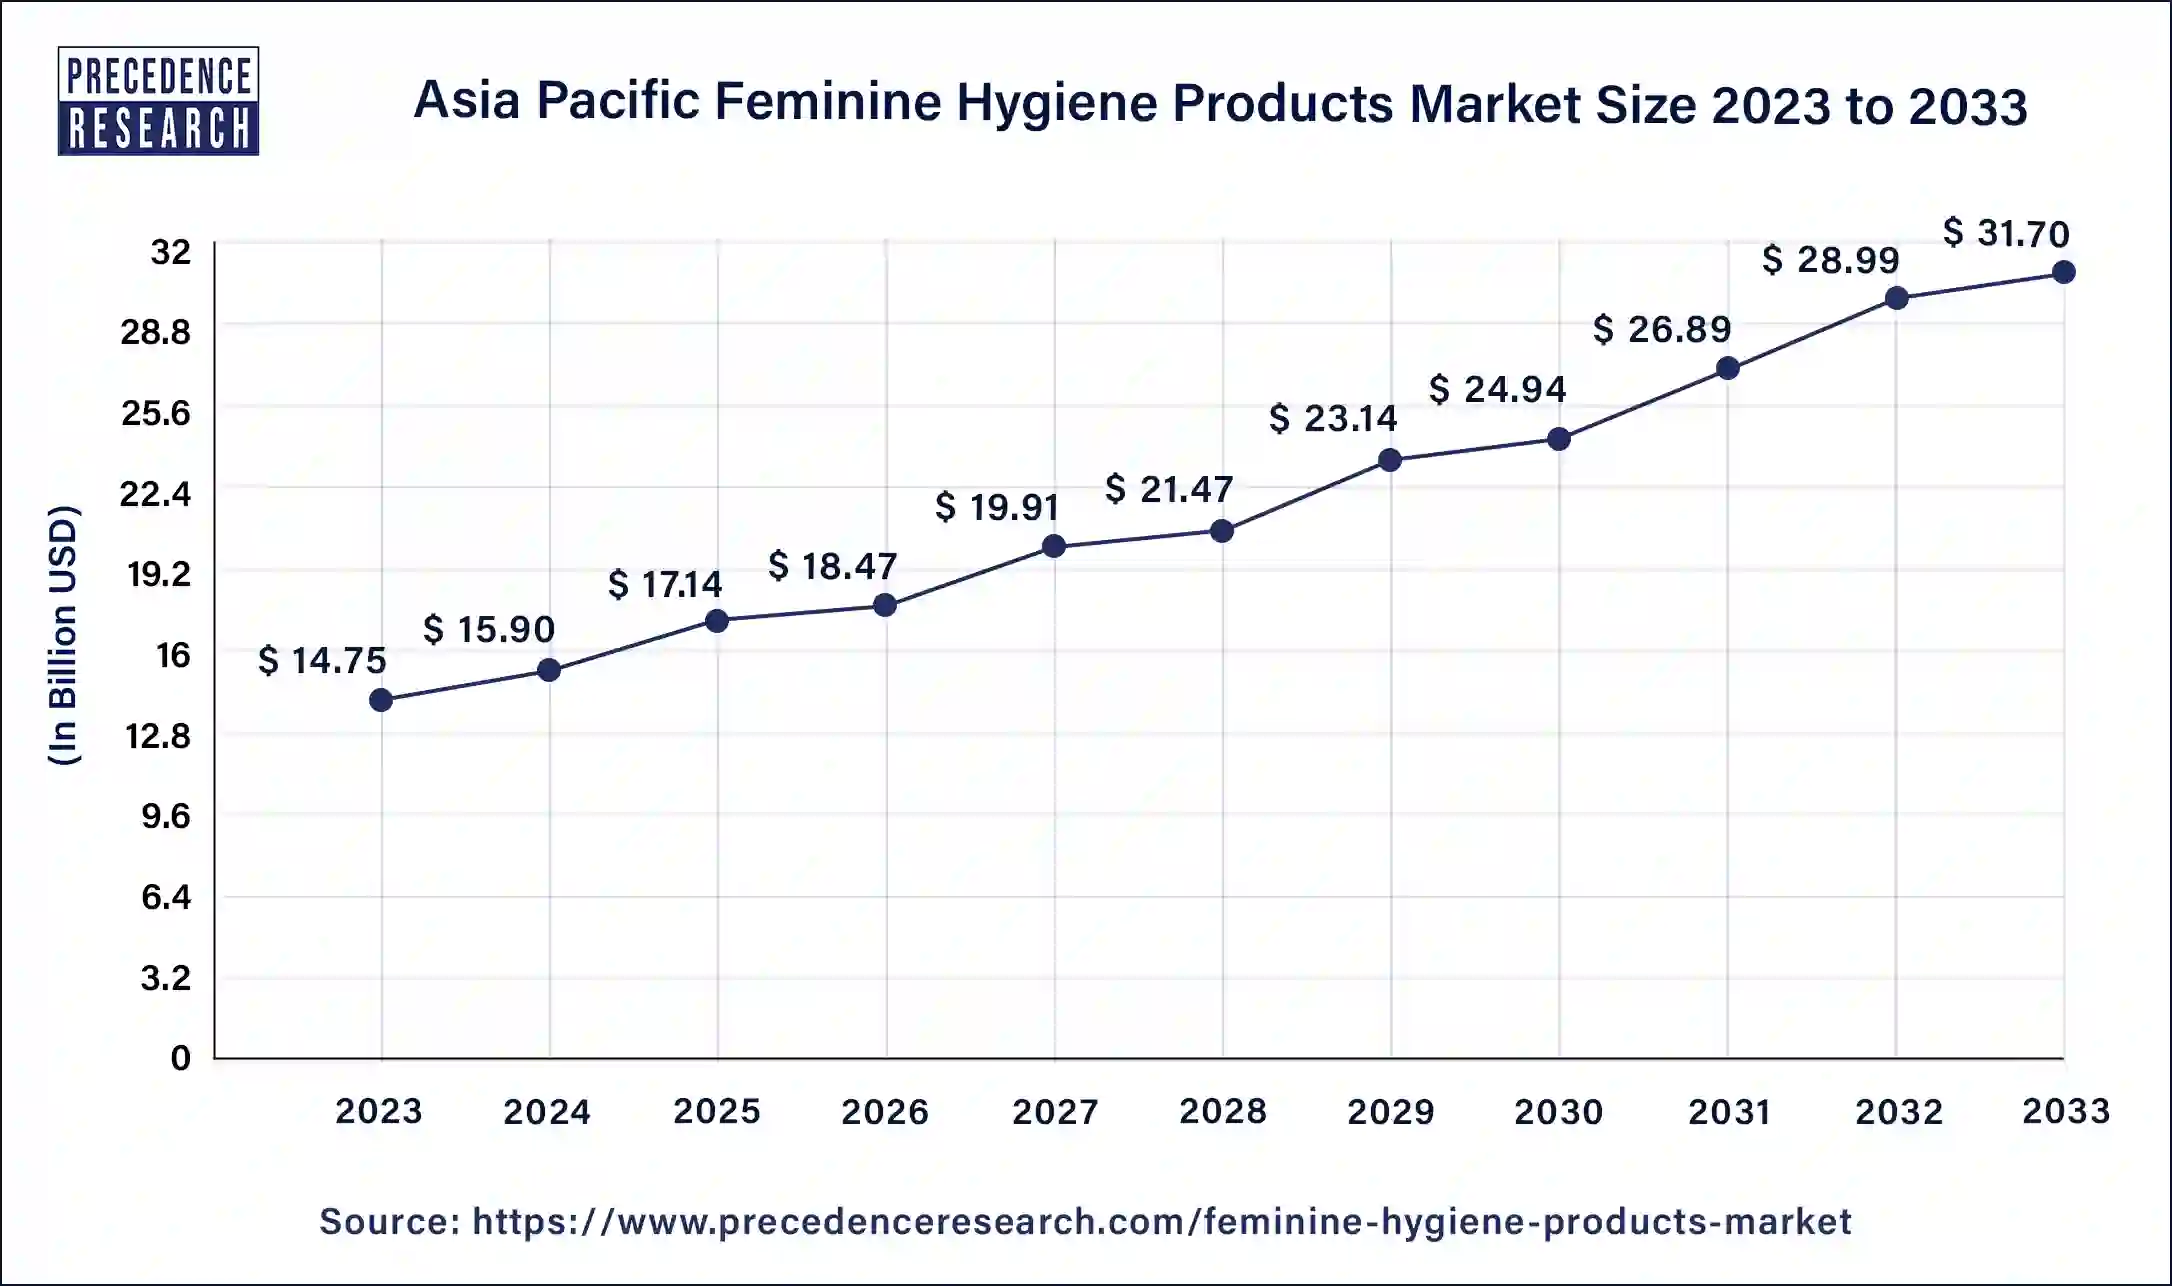 Asia Pacific Feminine Hygiene Products Market Size 2024 to 2033